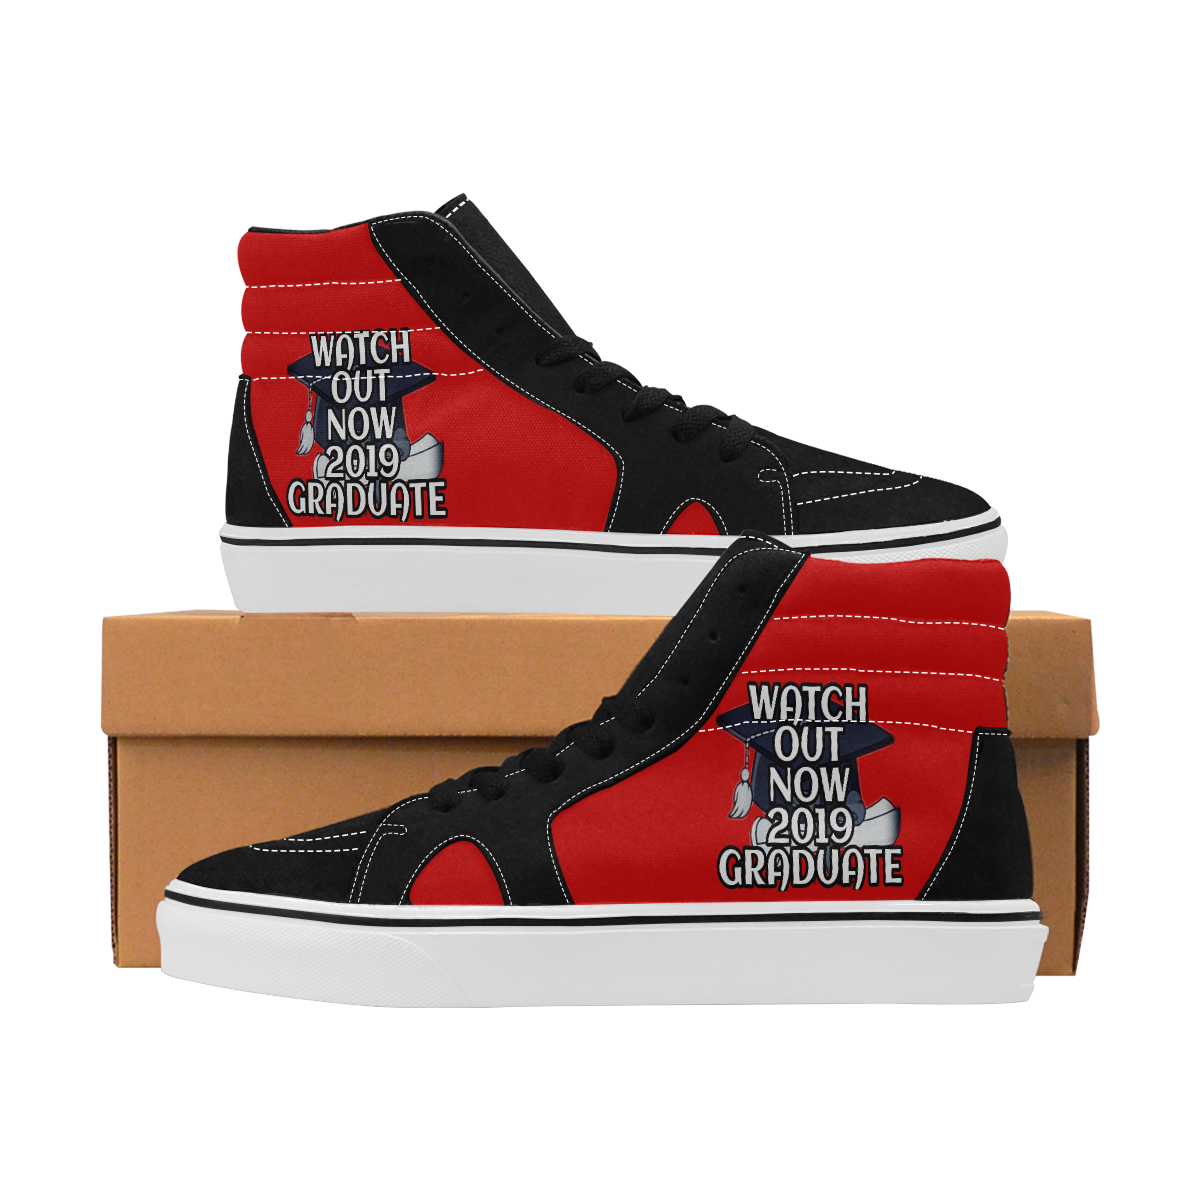 Watch Out Now 2019 Graduate Women's High Top Skateboarding Shoes/Large (Model E001-1)